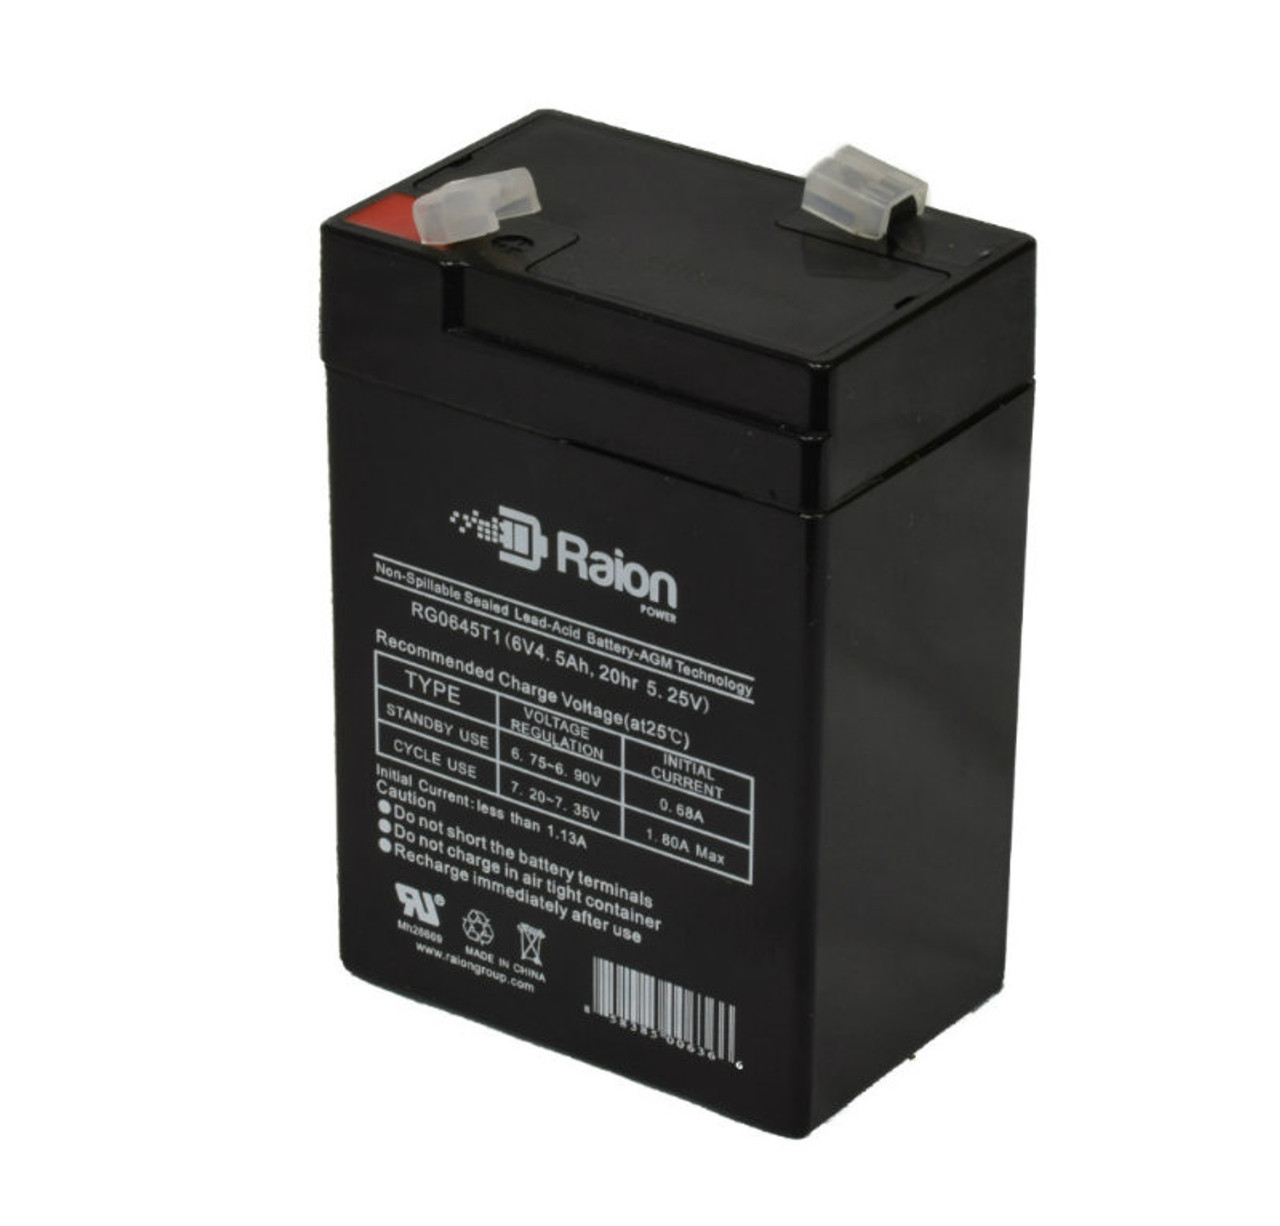 Raion Power RG0645T1 6V 4.5Ah Replacement Battery Cartridge for Kaufel 2019